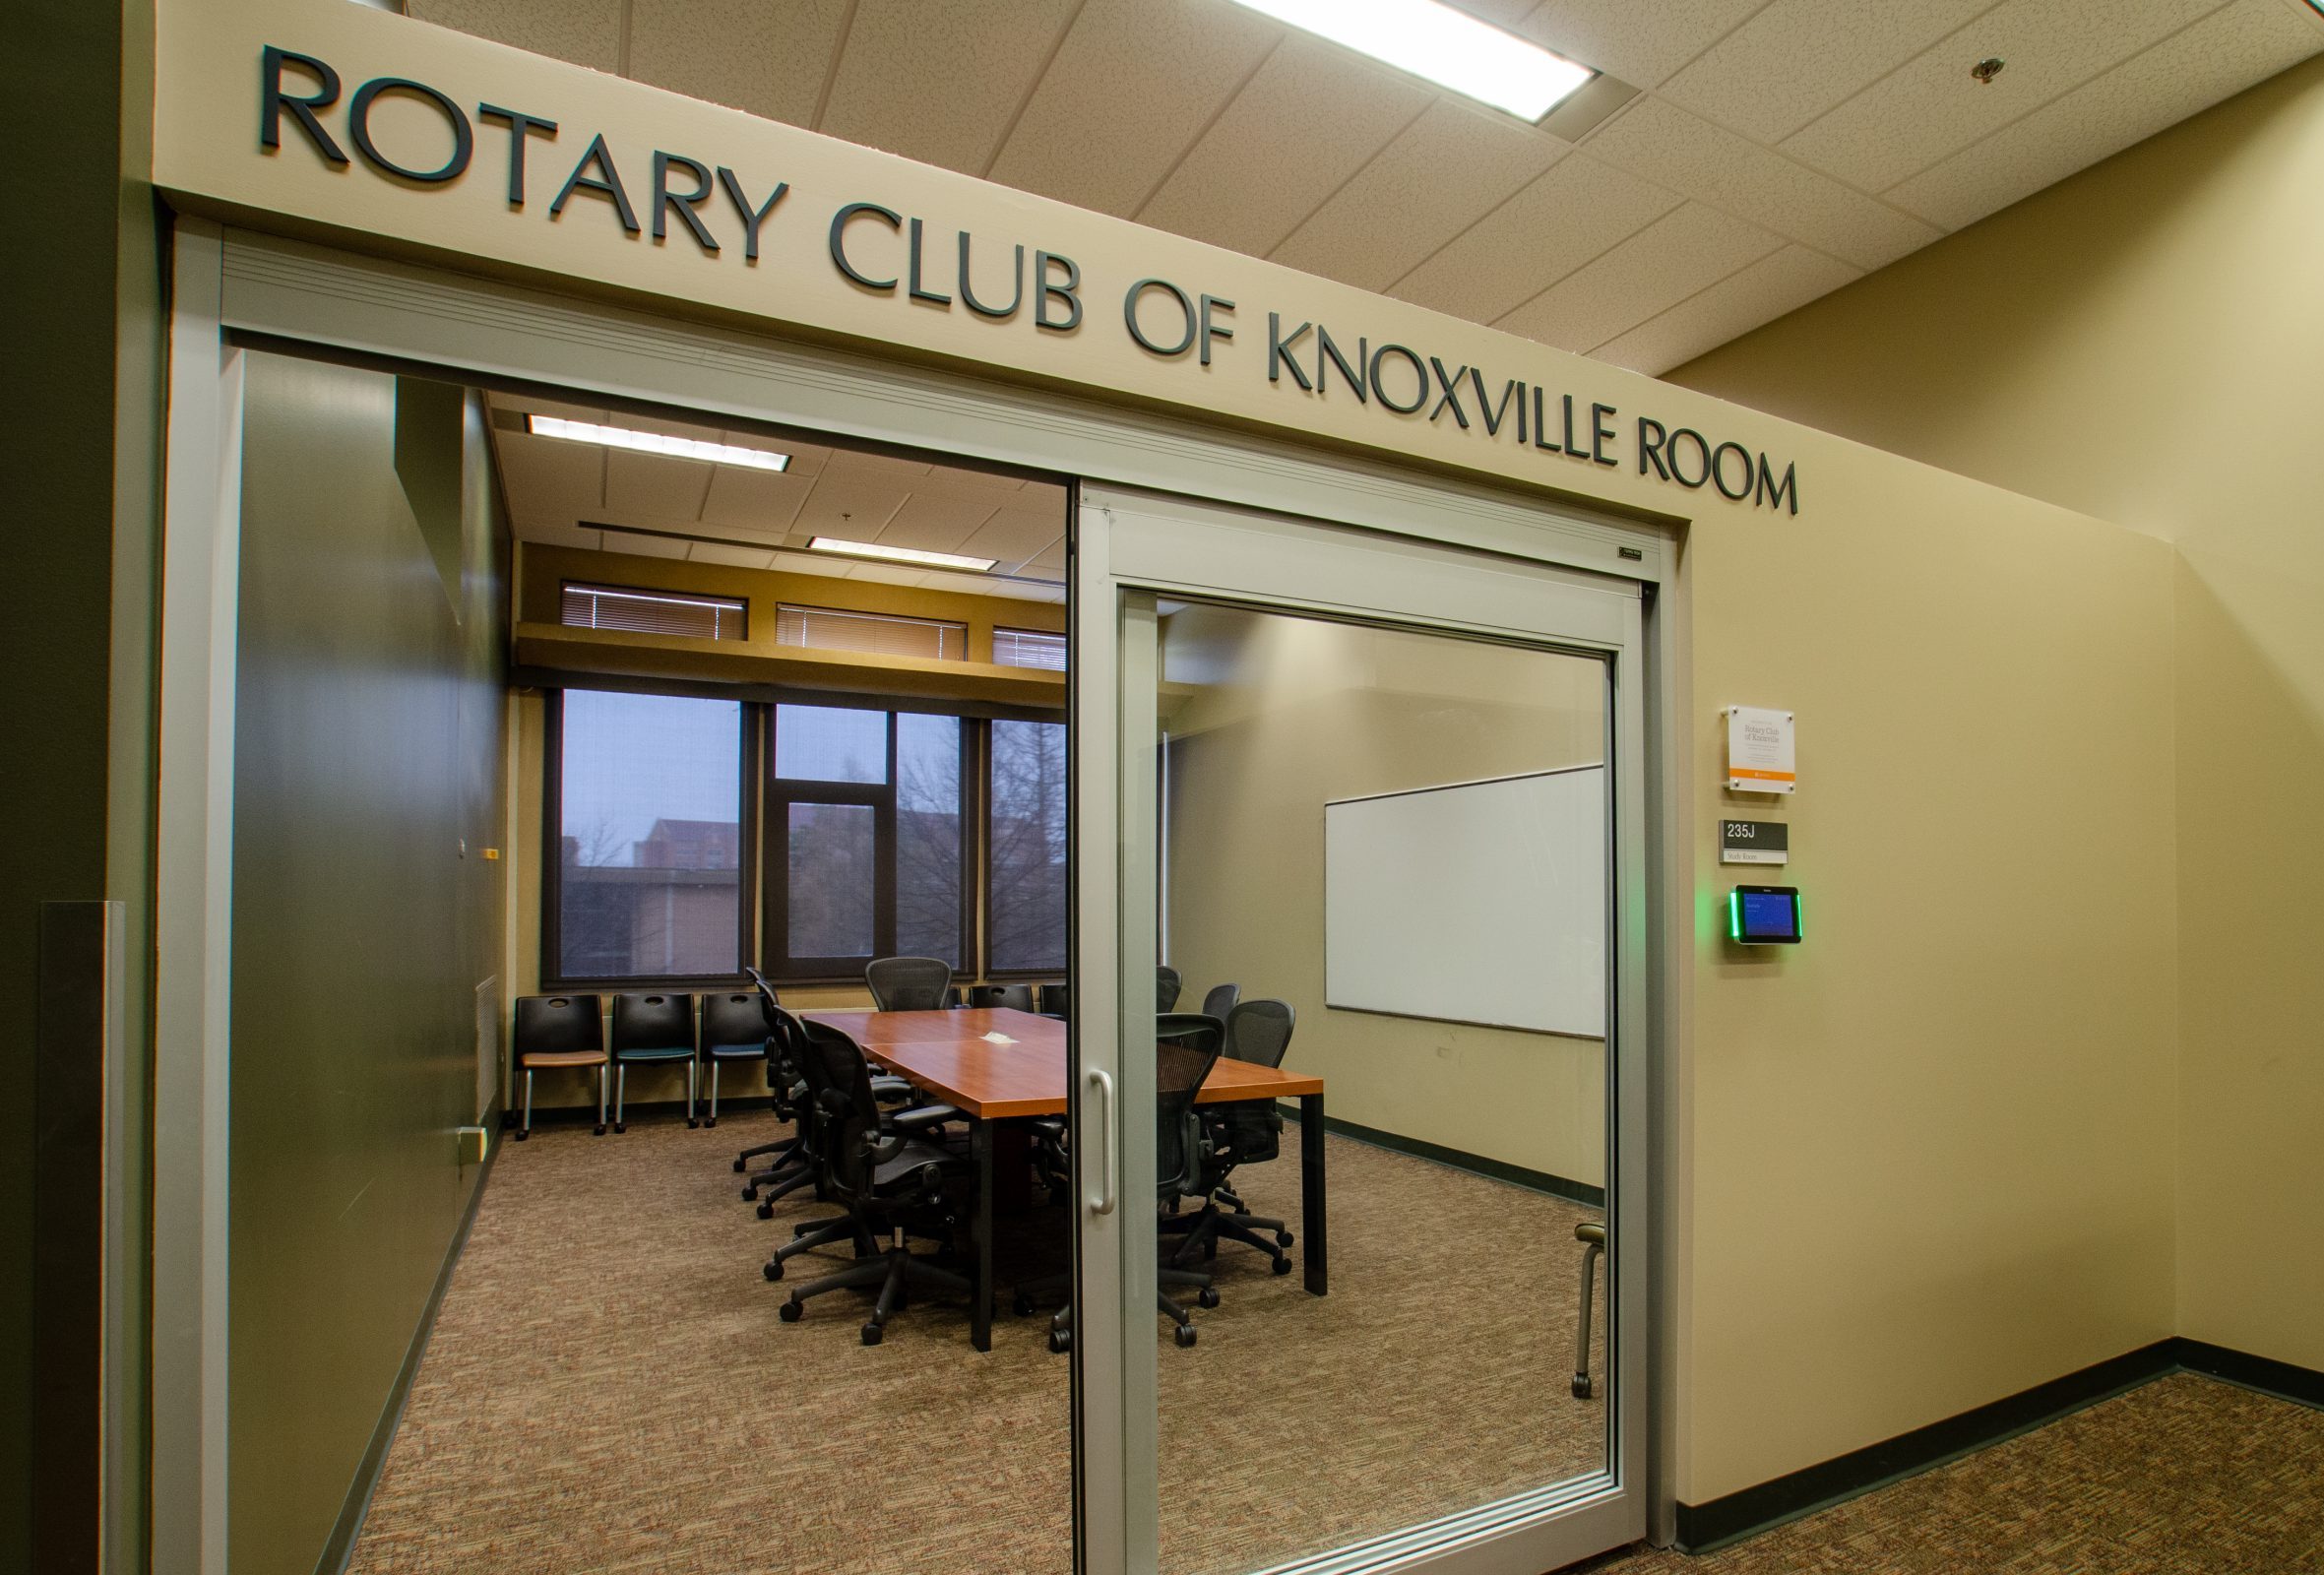 Rotary Club of Knoxville Room at Hodges Library in The Commons